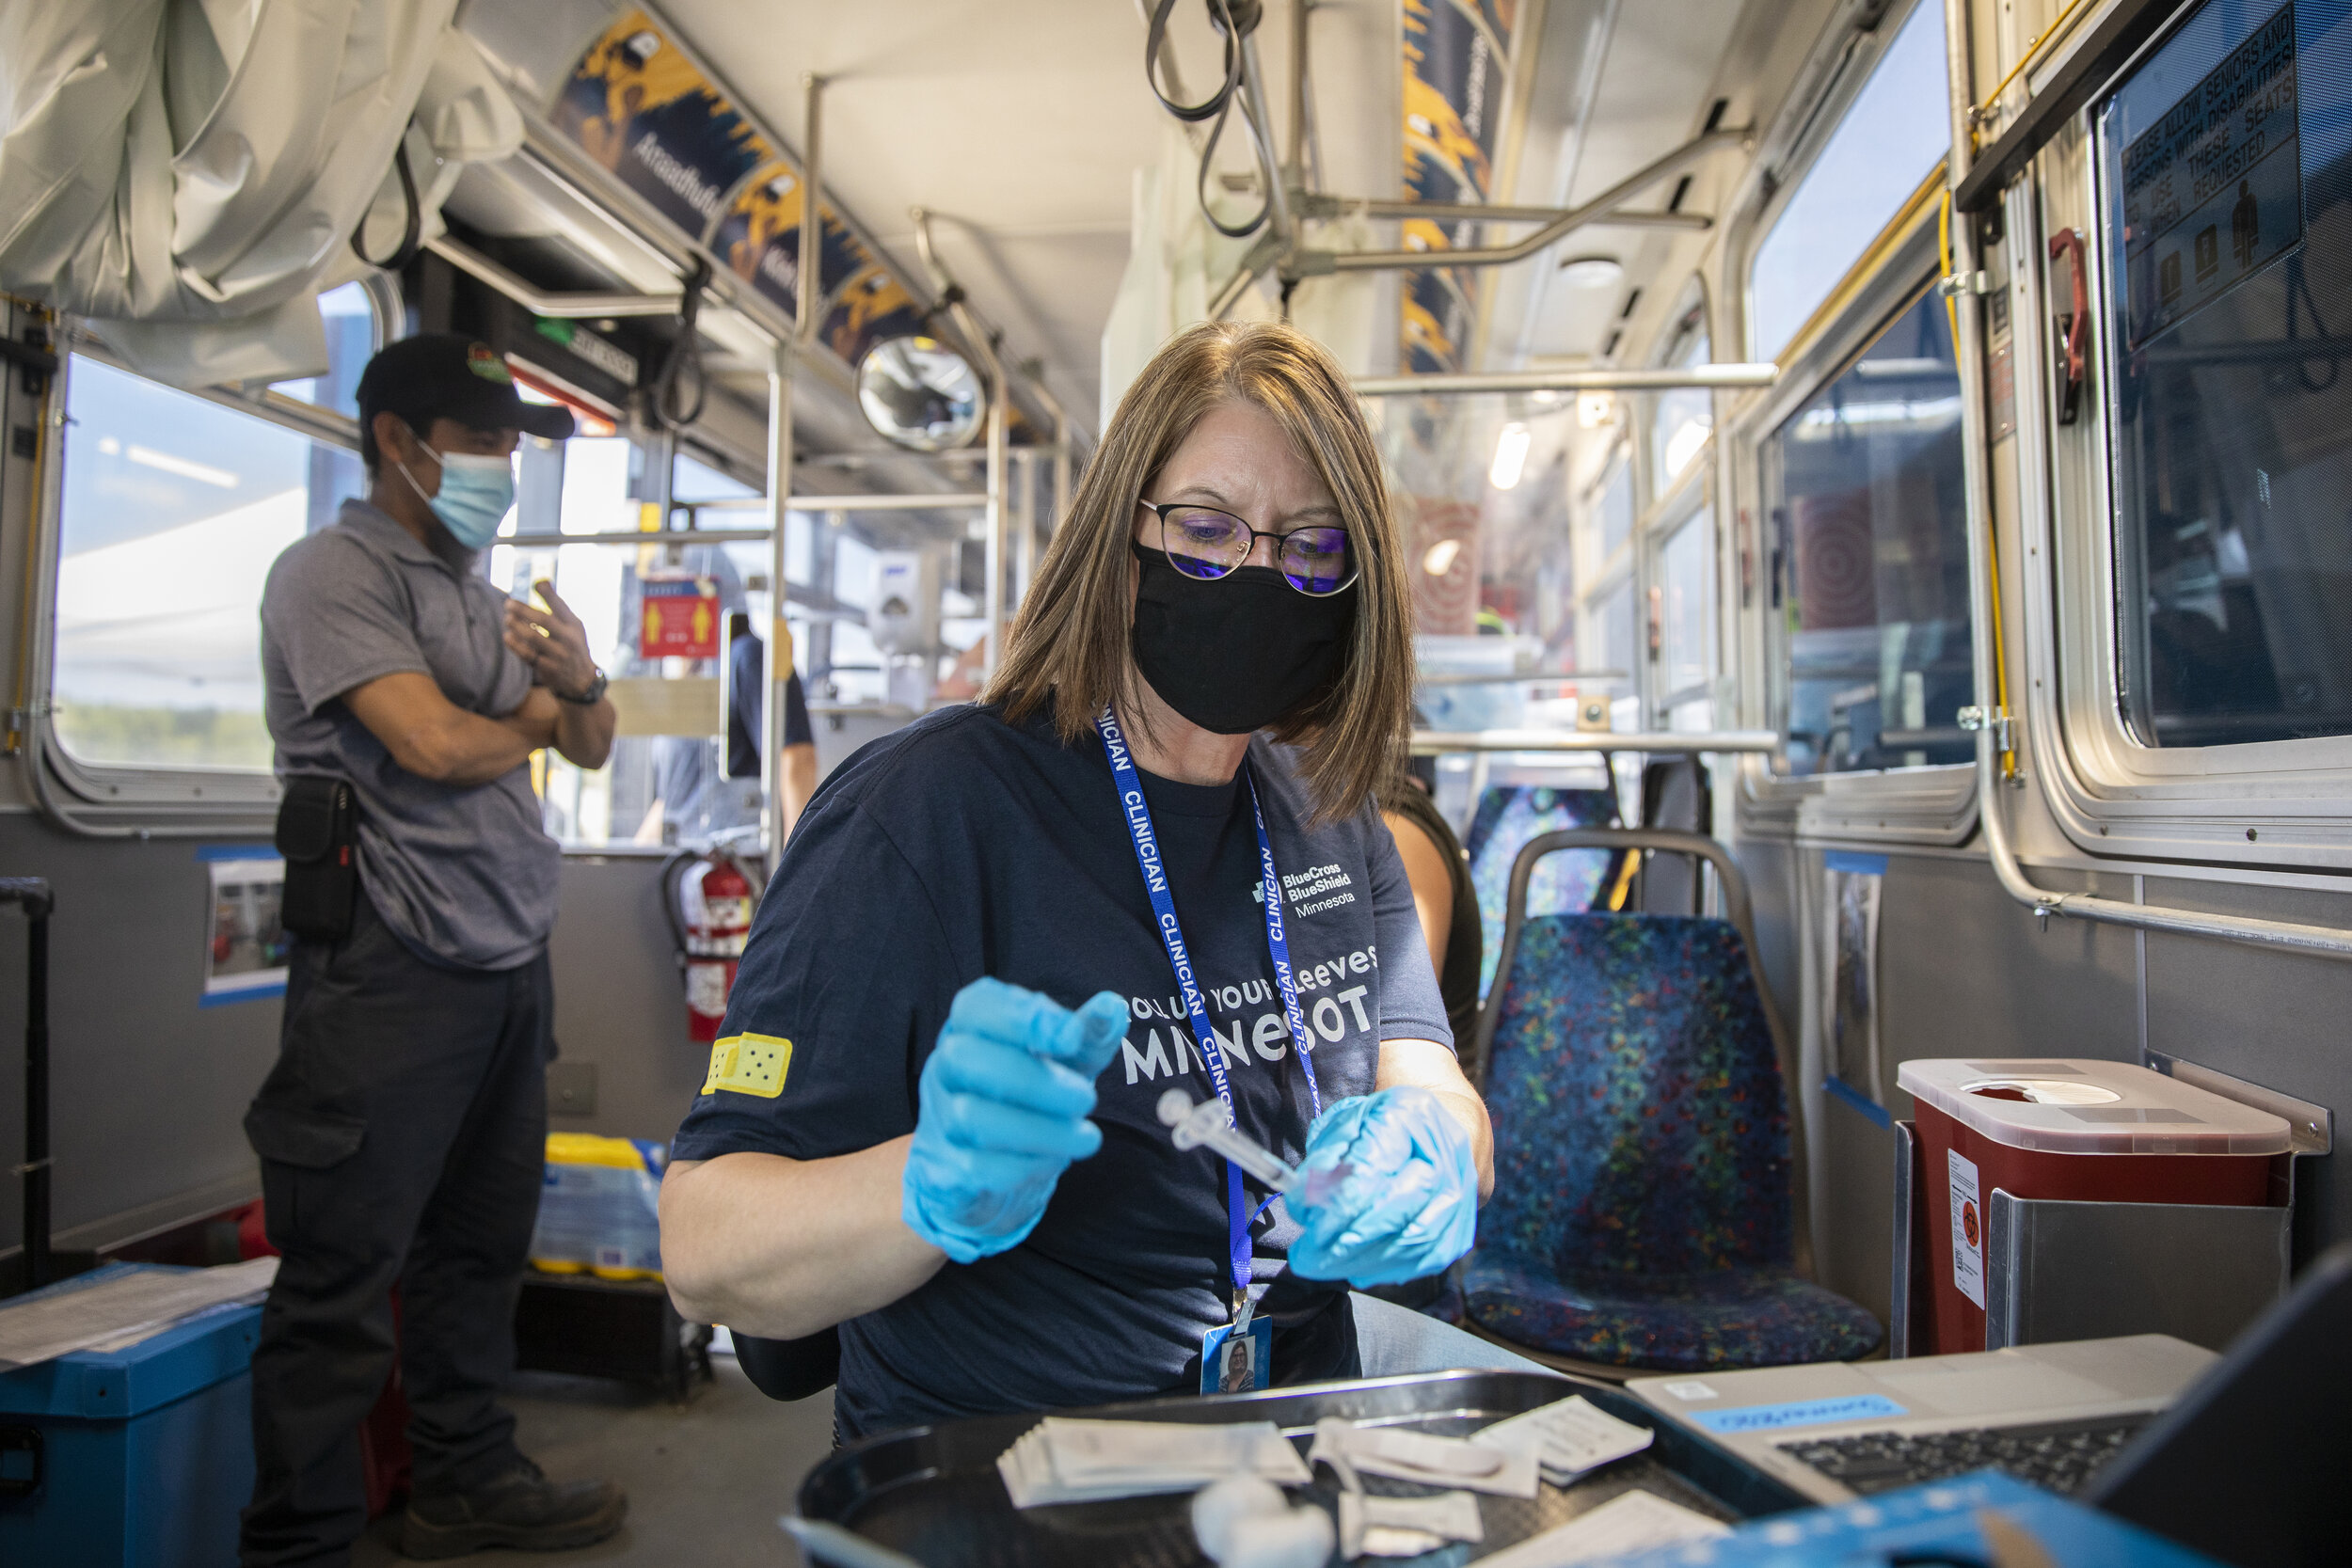  Amy Rewey prepares to administer the Covid-19 vaccine to an employee of Svihel Vegetable Farm aboard the mobile clinic. (Liam James Doyle for The New York Times) 